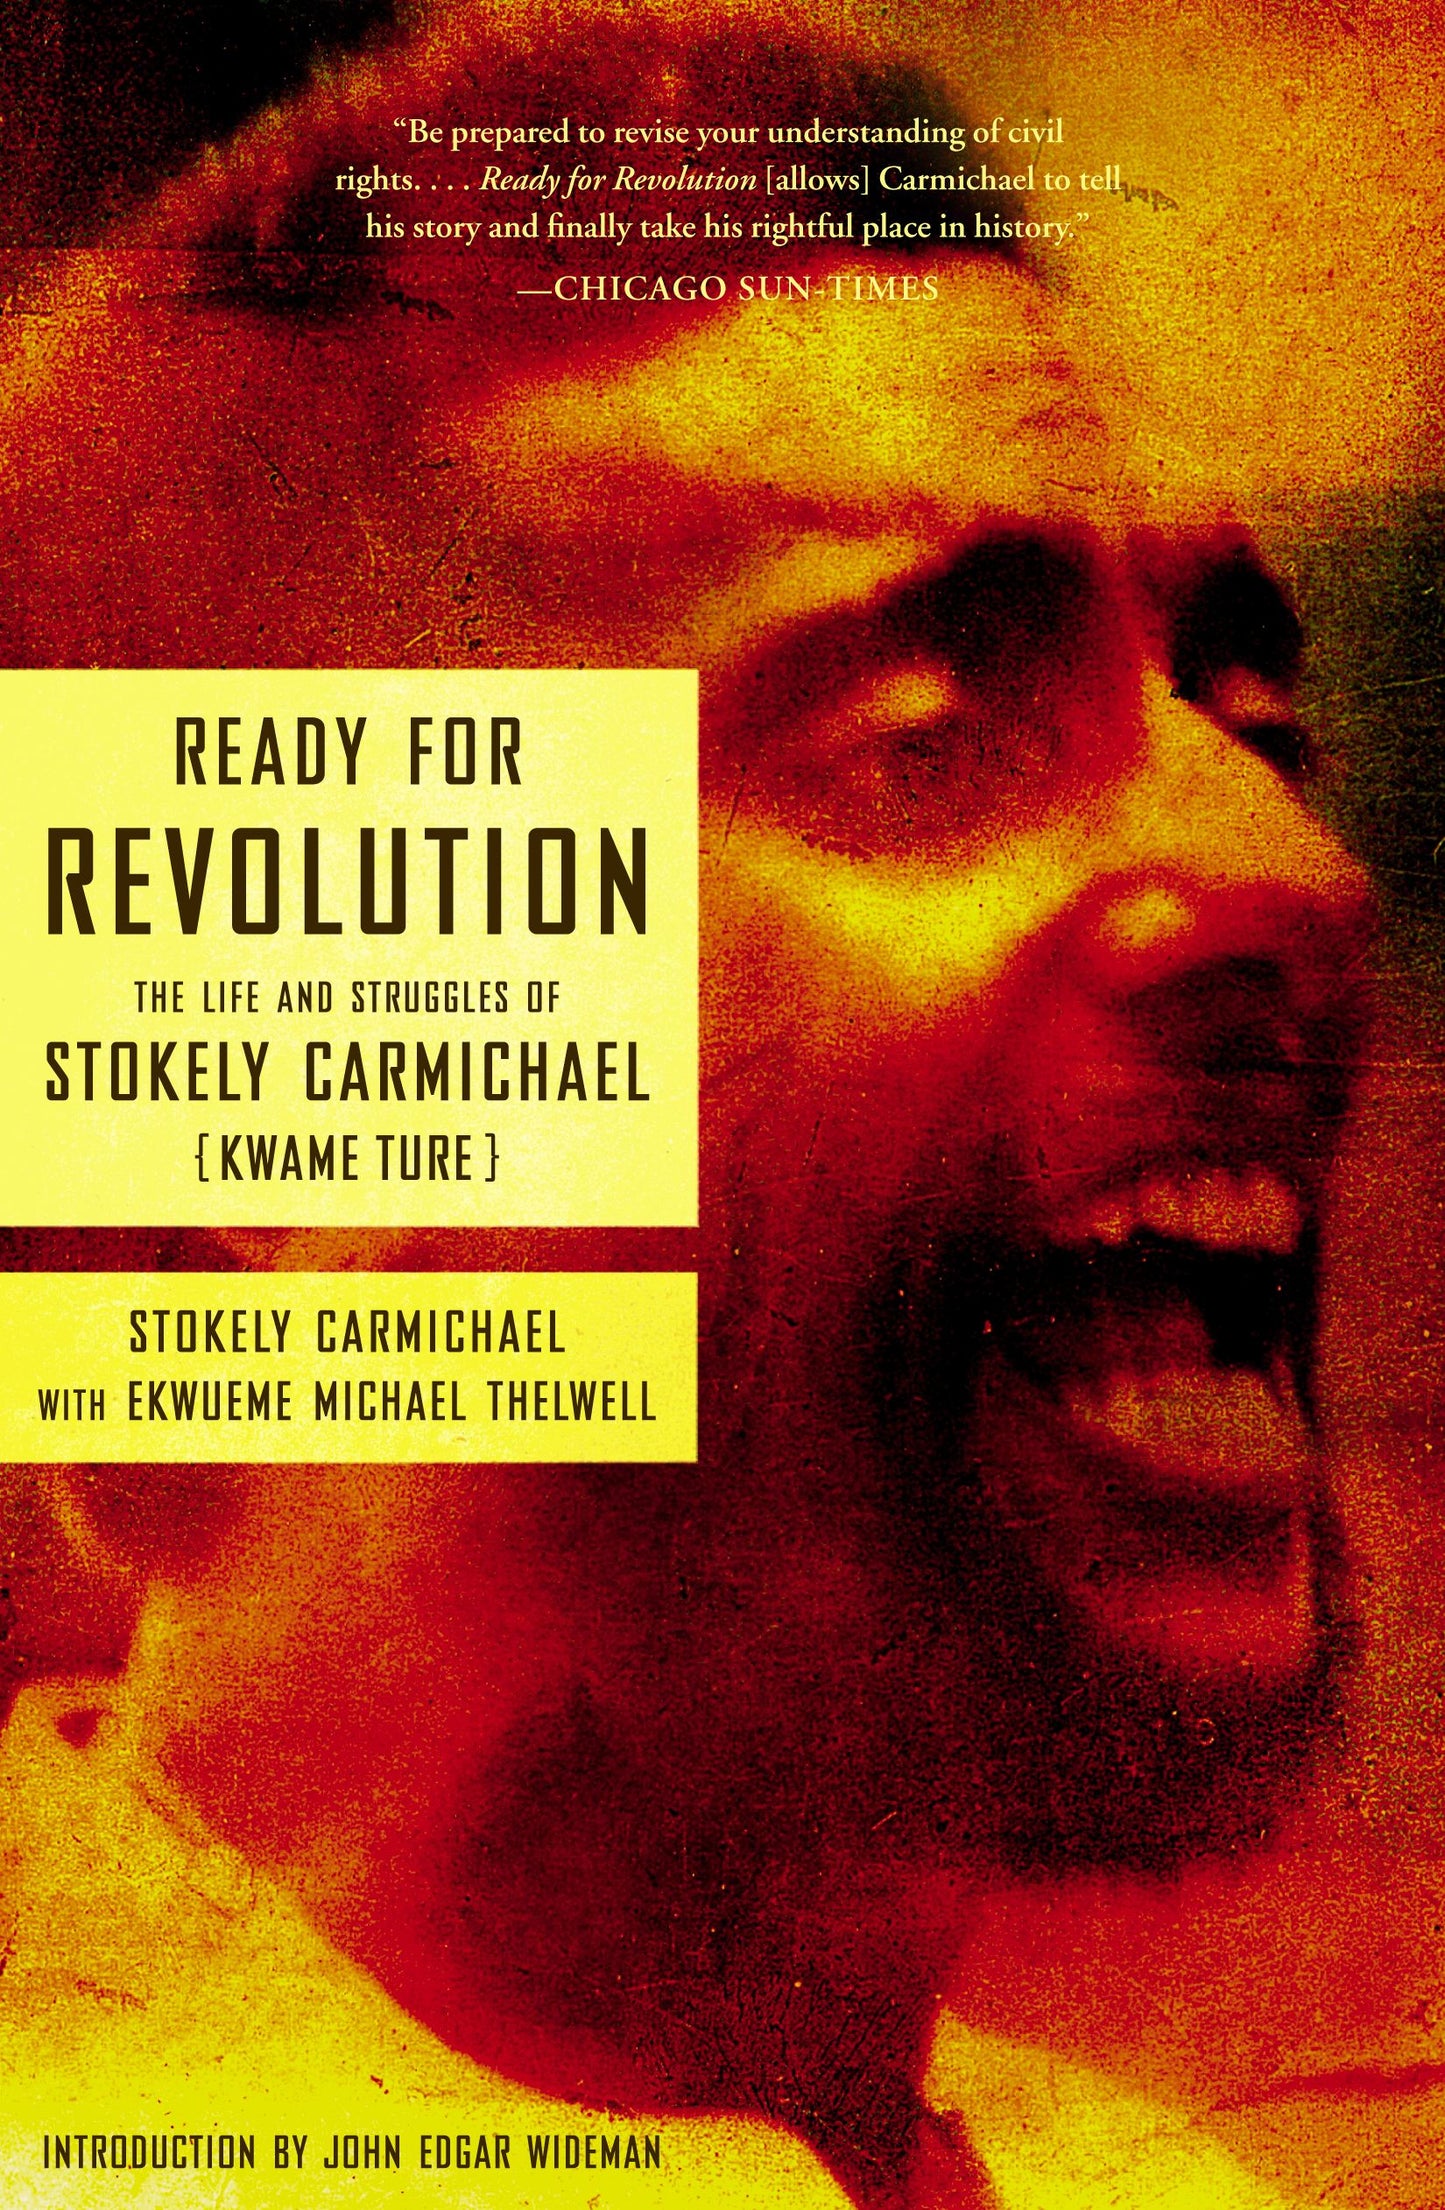 Ready for Revolution // The Life and Struggles of Stokely Carmichael (Kwame Ture)